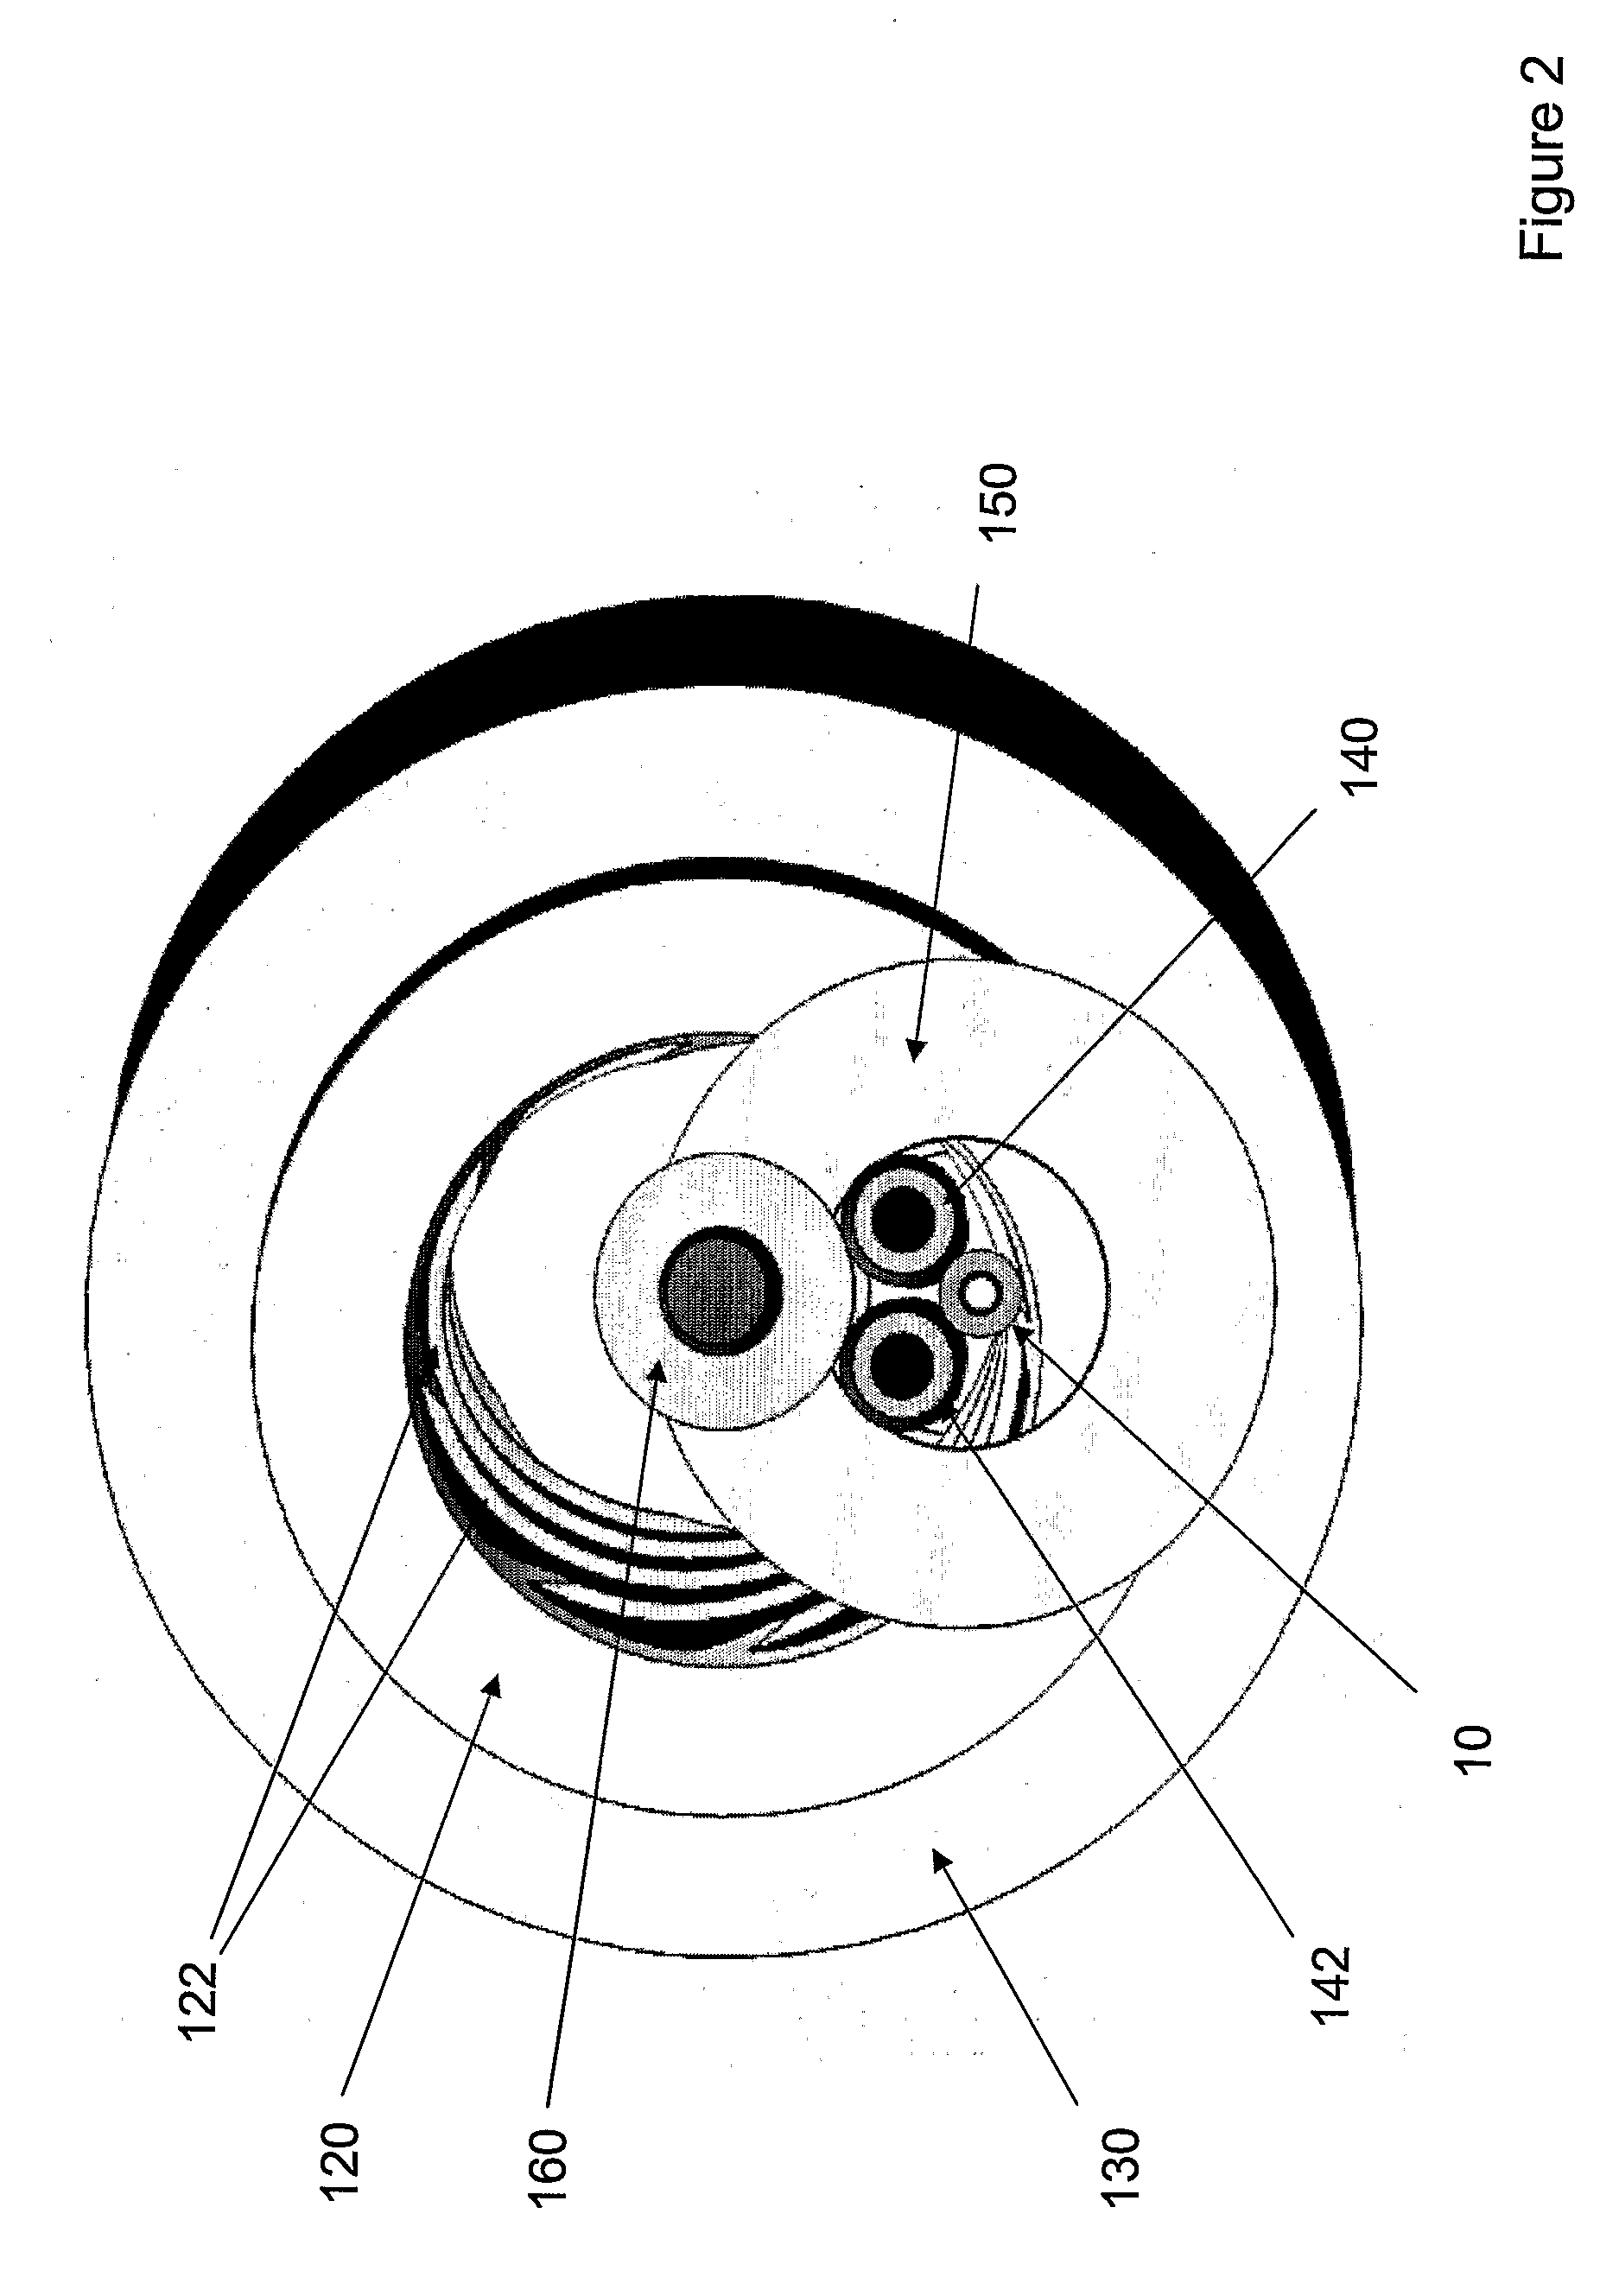 Apparatus and method for forming annular grooves on the outer surface of a cable or tube